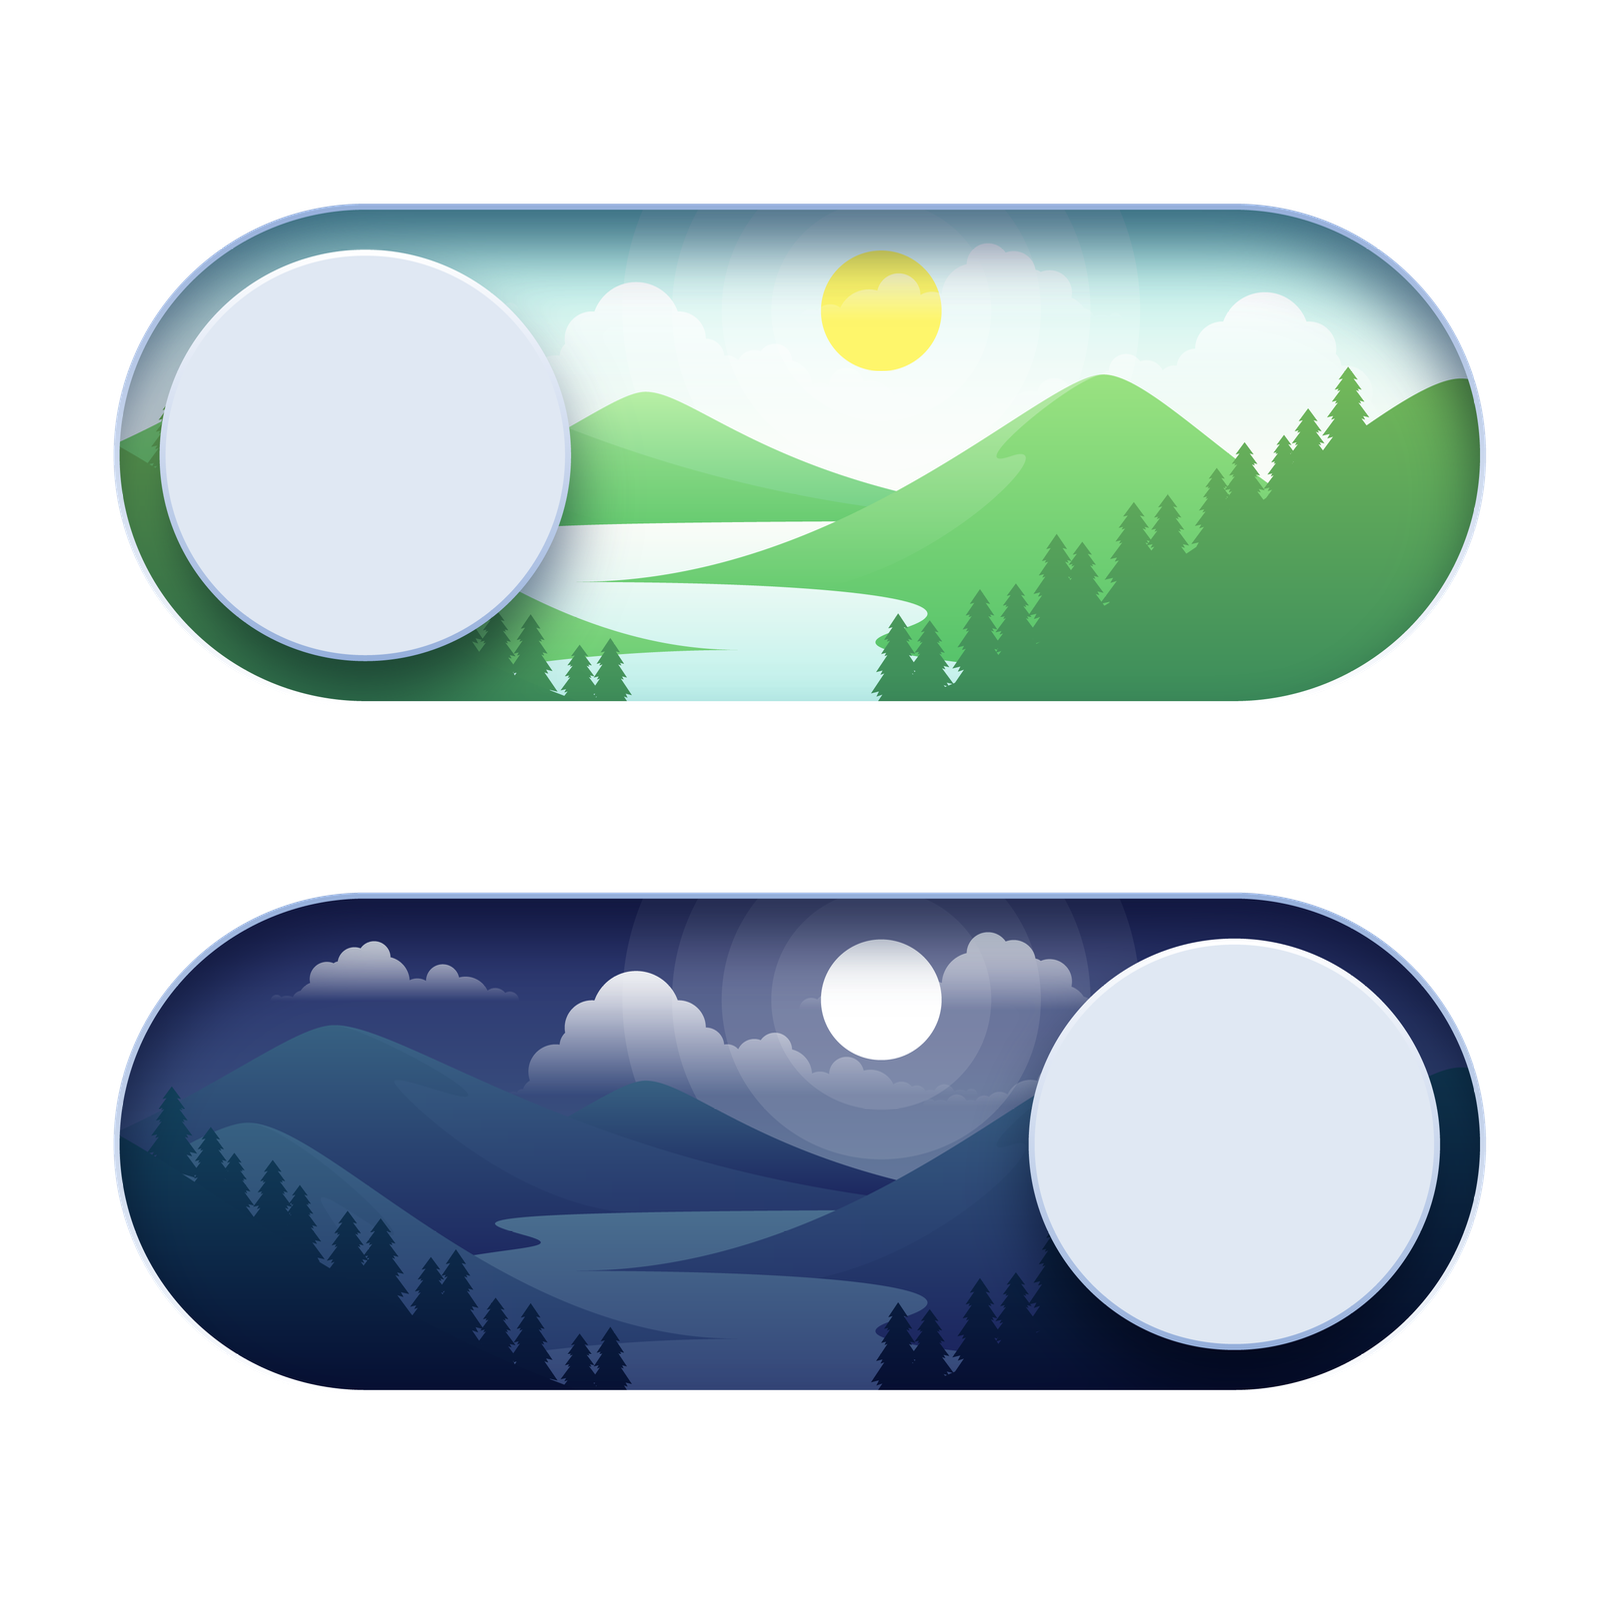 Day and night toggle switch illustration 01